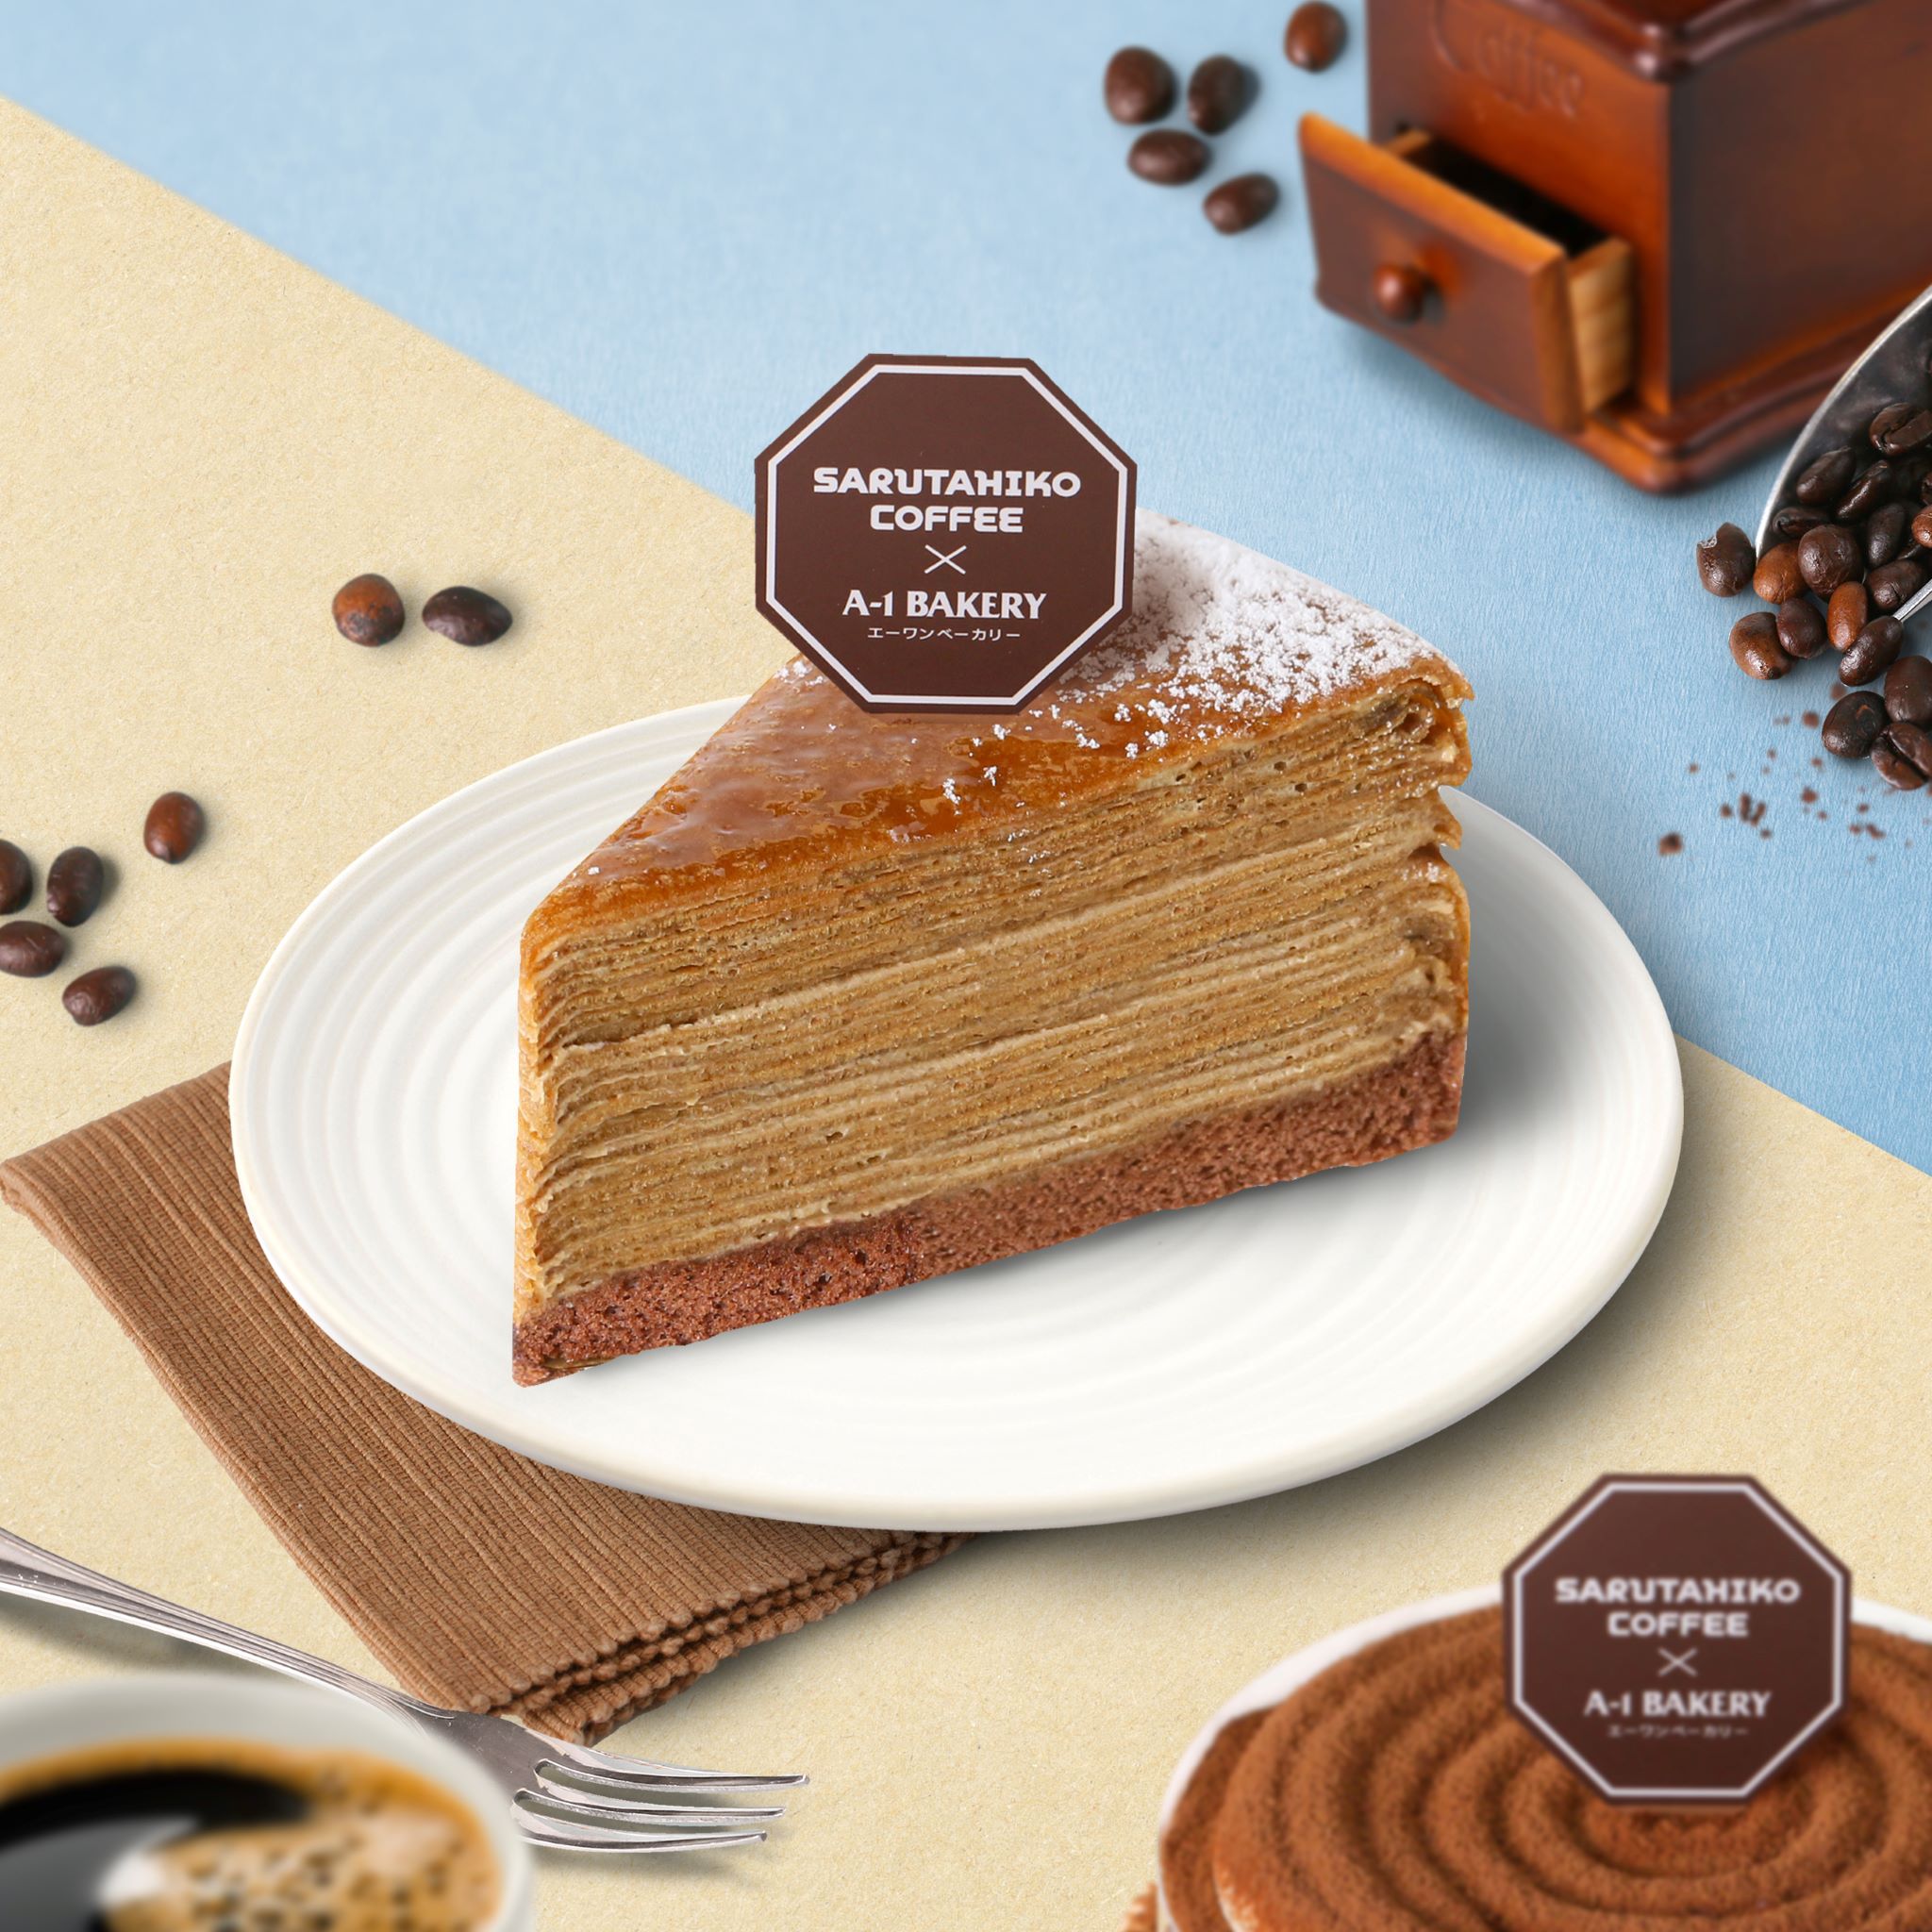 A-1 Bakery and Sarutahiko Coffee collaborate to launch [Limited Edition] Coffee Desserts Collection